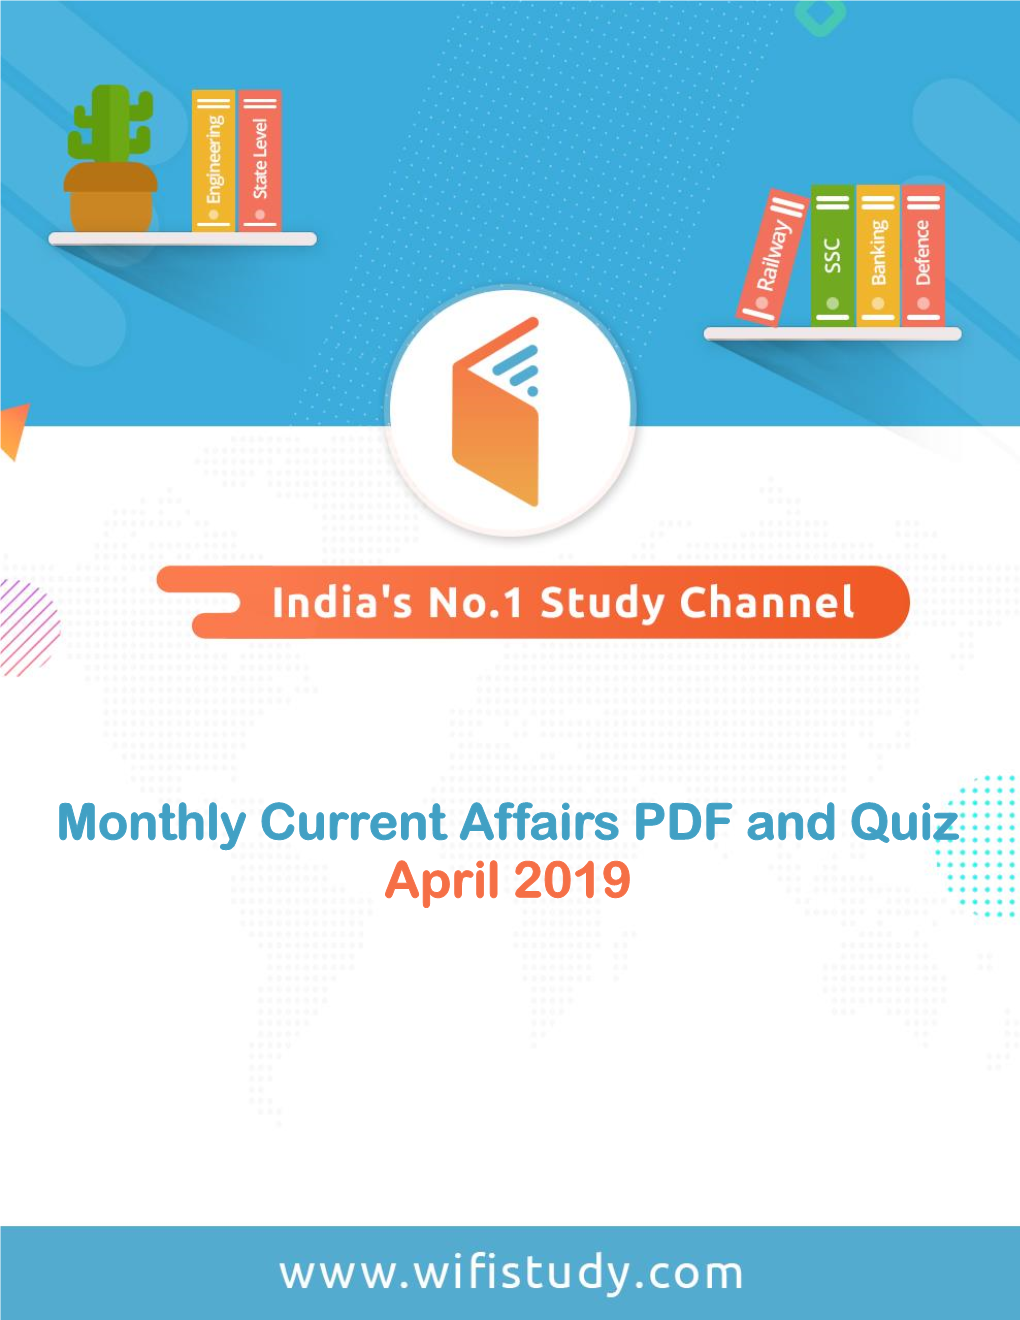 Monthly Current Affairs PDF and Quiz April 2019